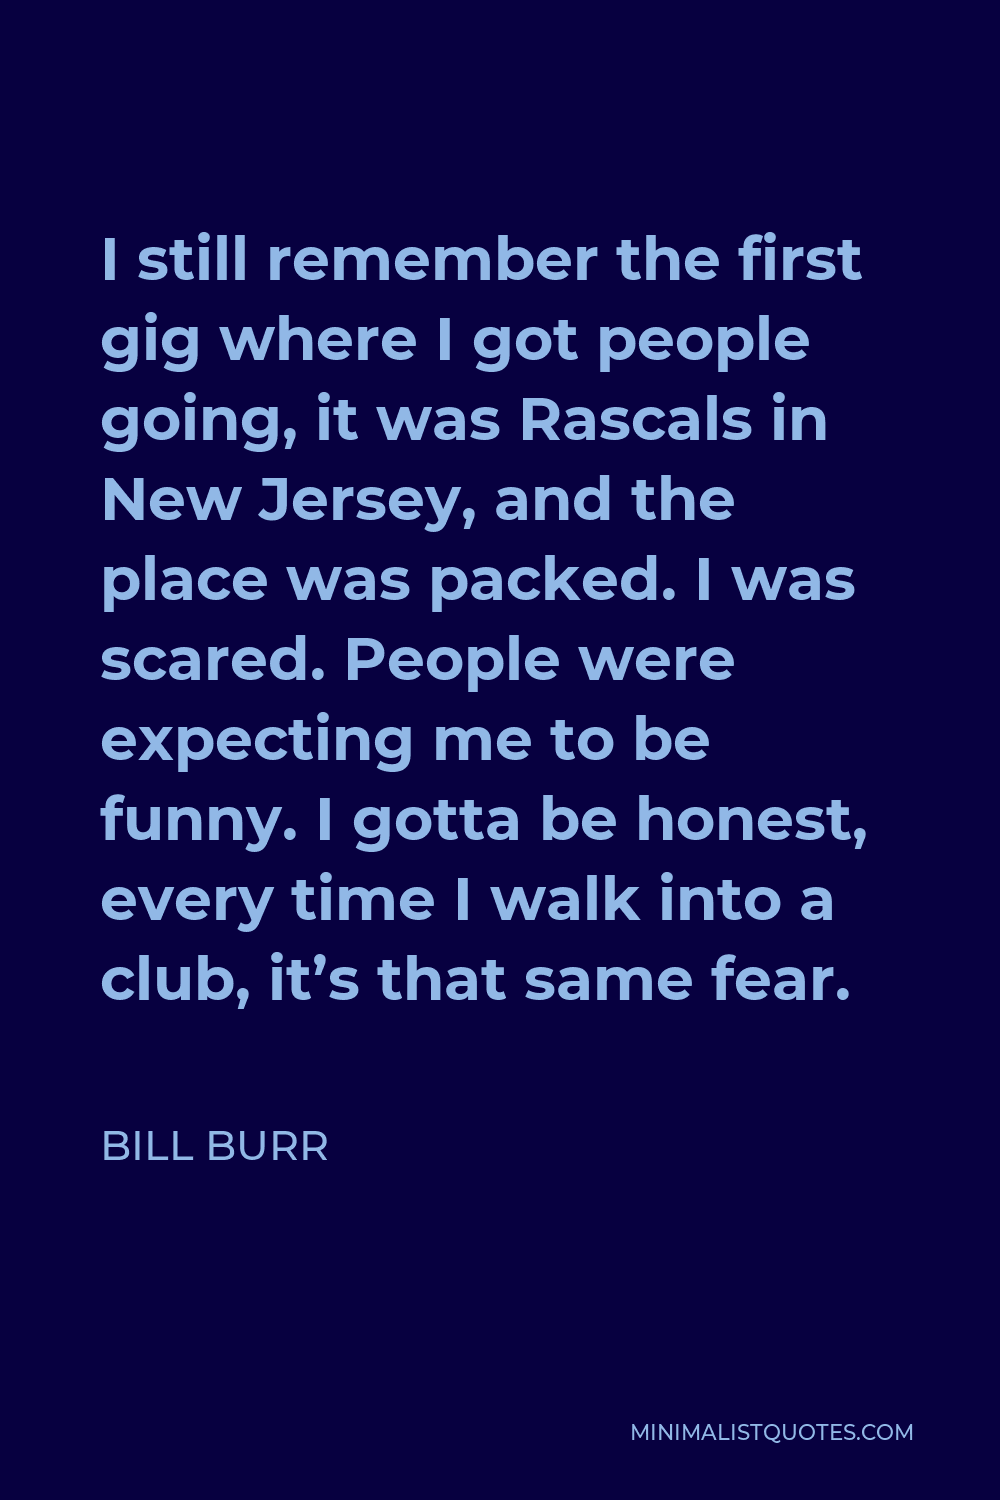 Bill Burr Quote - I still remember the first gig where I got people going, it was Rascals in New Jersey, and the place was packed. I was scared. People were expecting me to be funny. I gotta be honest, every time I walk into a club, it’s that same fear.